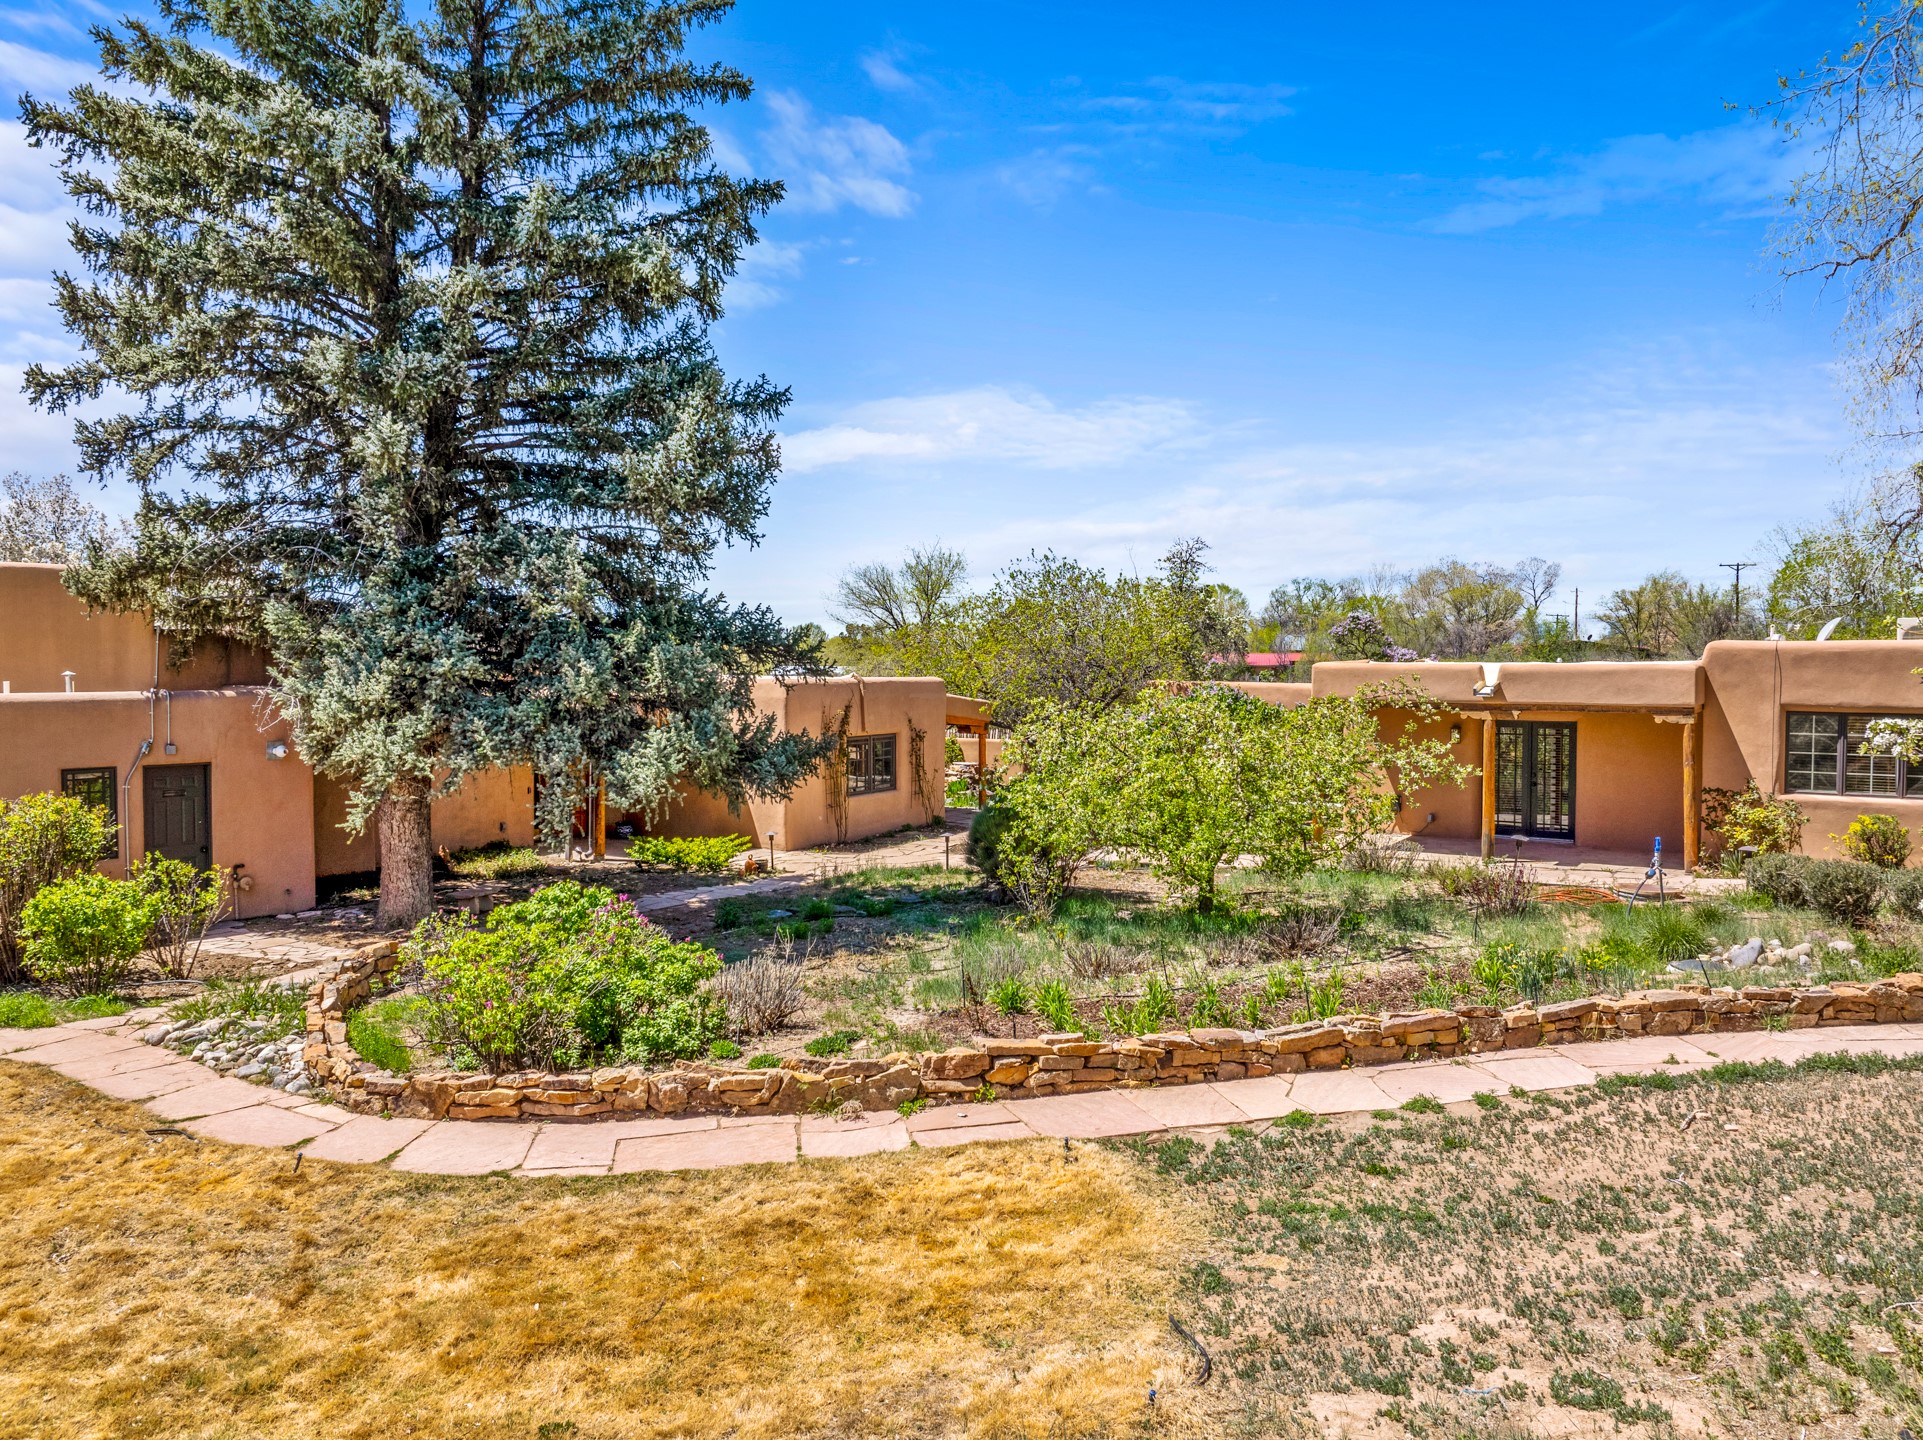 222 Nm 503 Nambe, Santa Fe, New Mexico 87506, 4 Bedrooms Bedrooms, ,5 BathroomsBathrooms,Residential,For Sale,222 Nm 503 Nambe,202401035